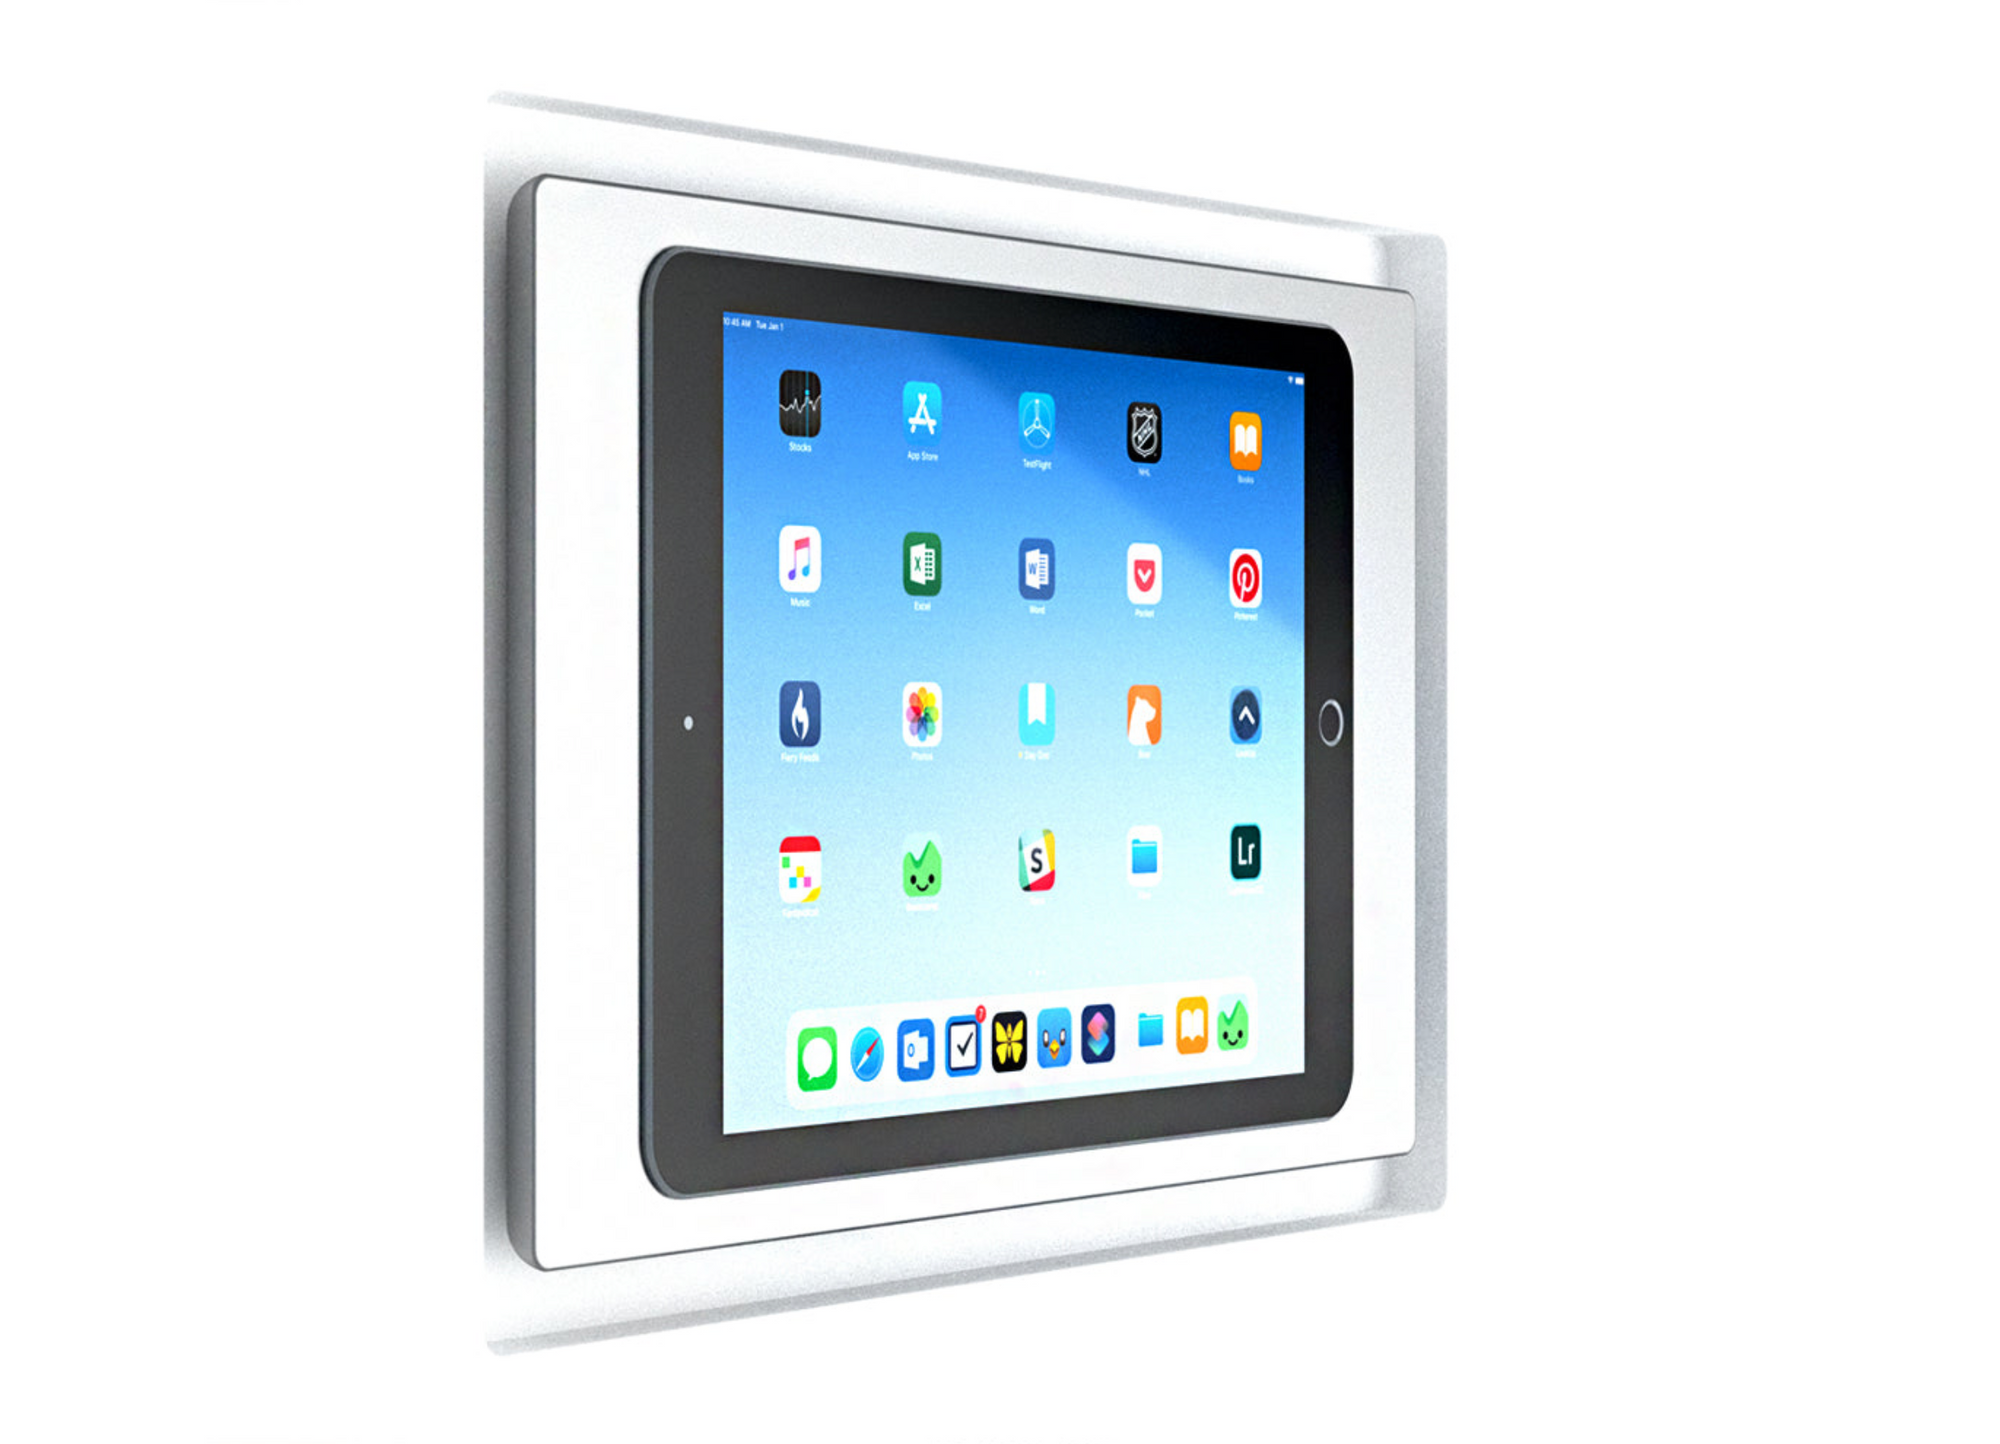 SL-IPCPL-375 Large iPad In-Wall Mount. iPad Designer Style In-Wall Plaster Mounting Platform (Large), designed for seamless integration with IPORT's ConnectPro parts.